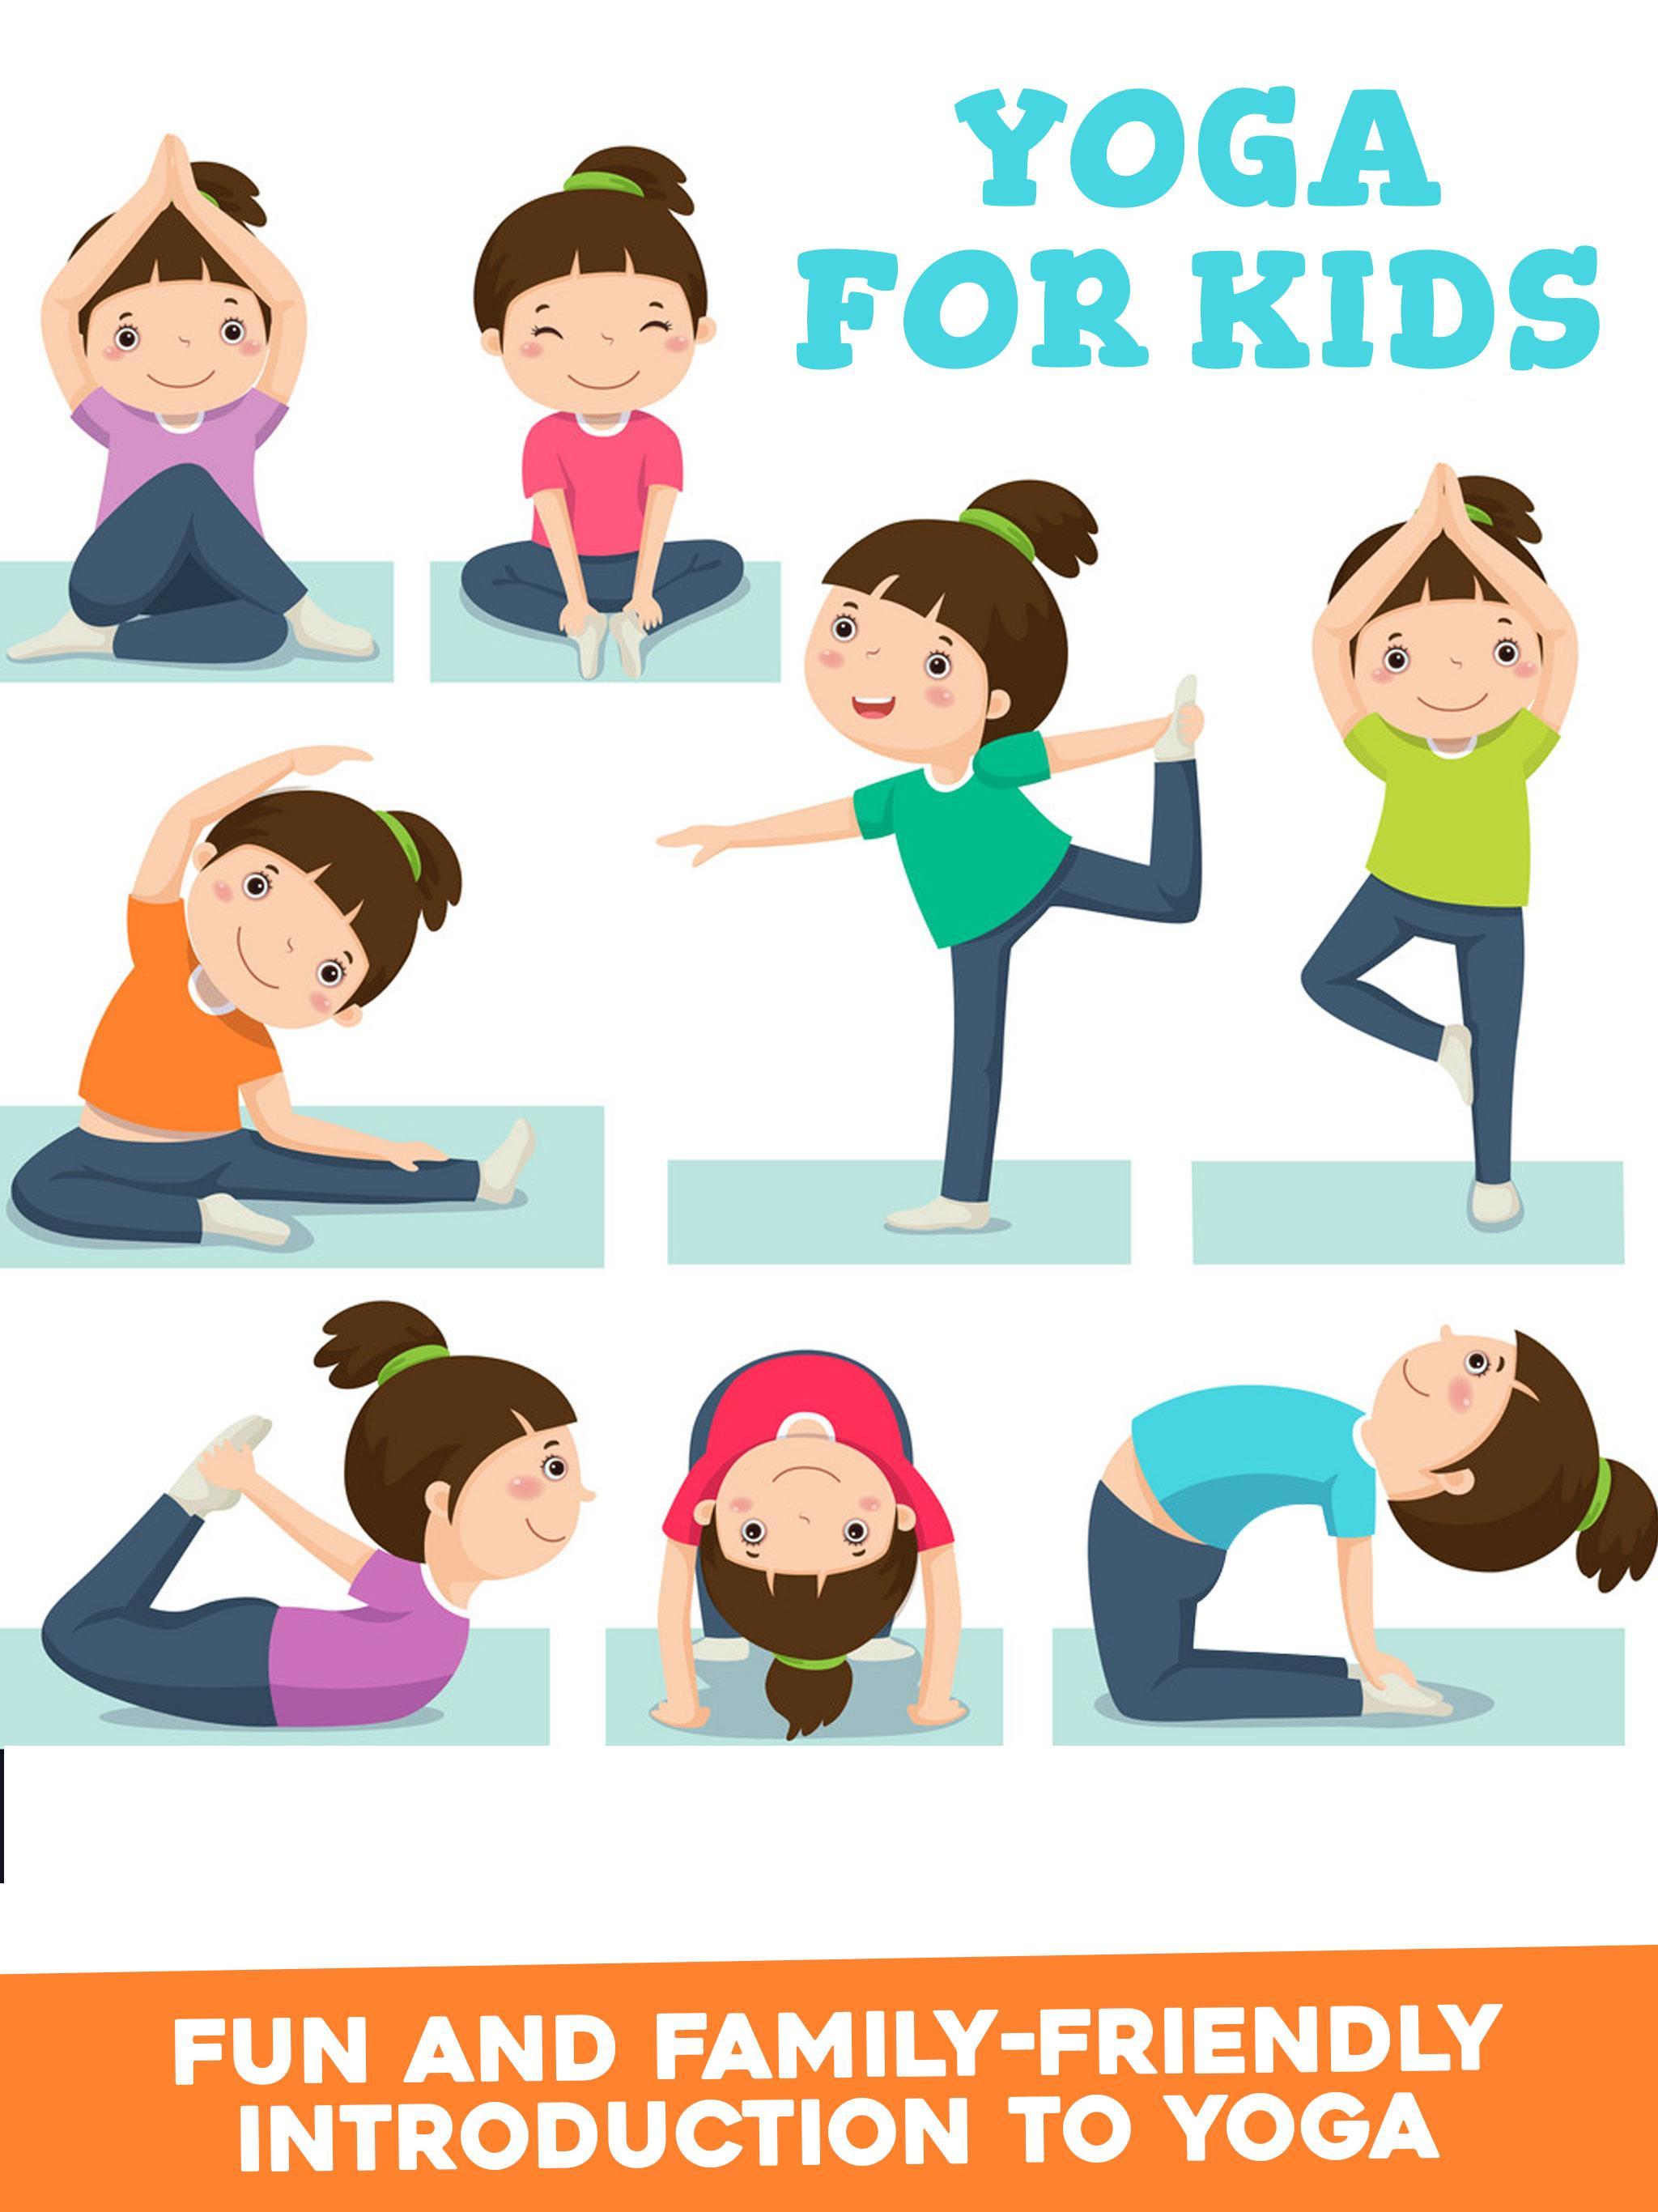 Yoga Poses For 2 Kids Easy - Entrevistamosa